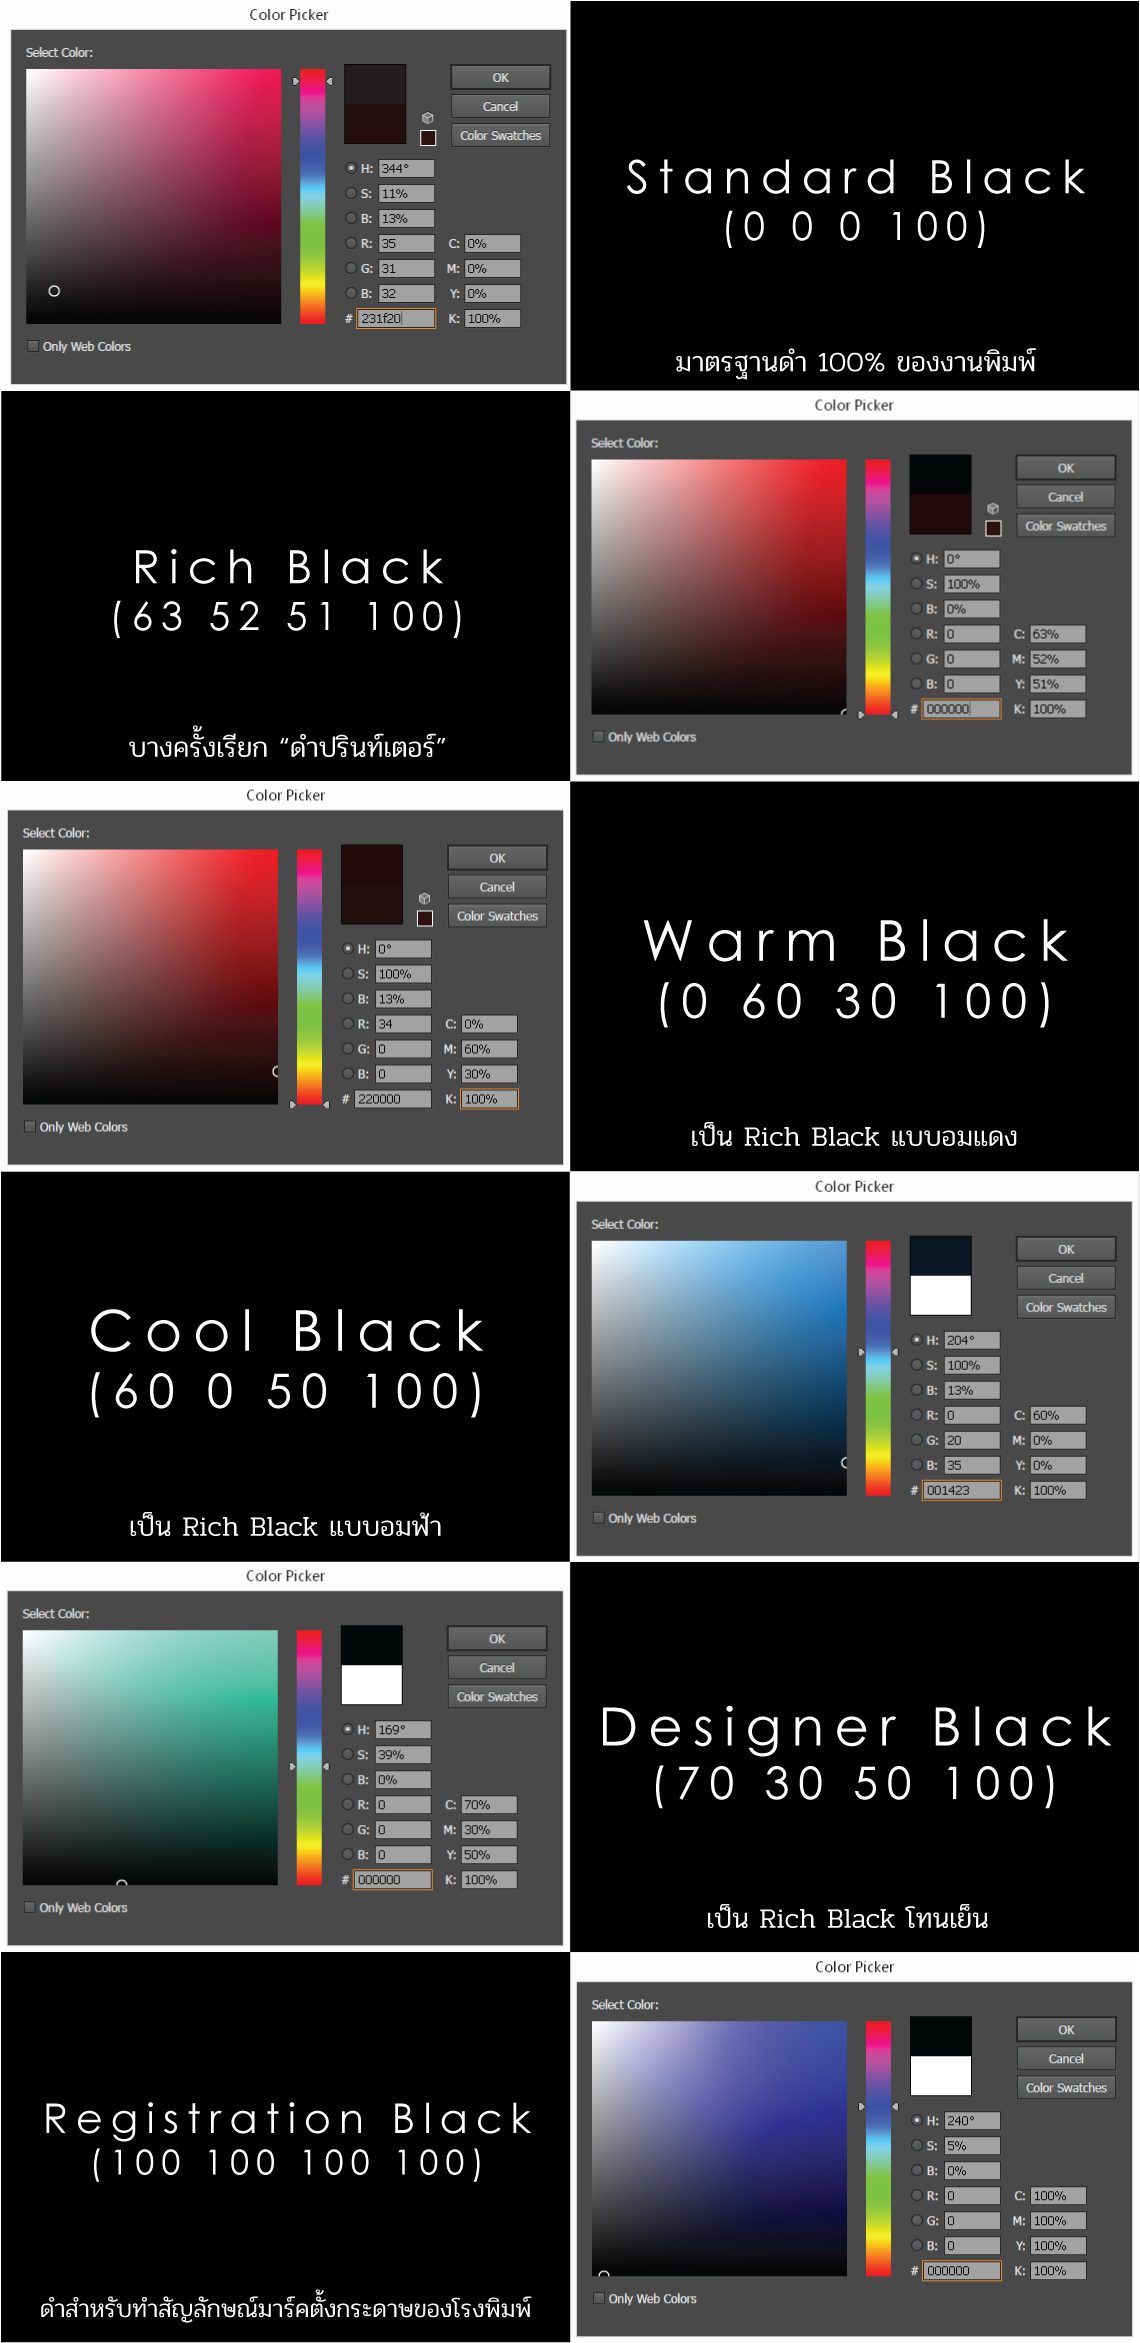 black, photoshop design, set, illustrator, print, black, cmyk, rgb, what's the difference? black for printing Print black and it's distorted.